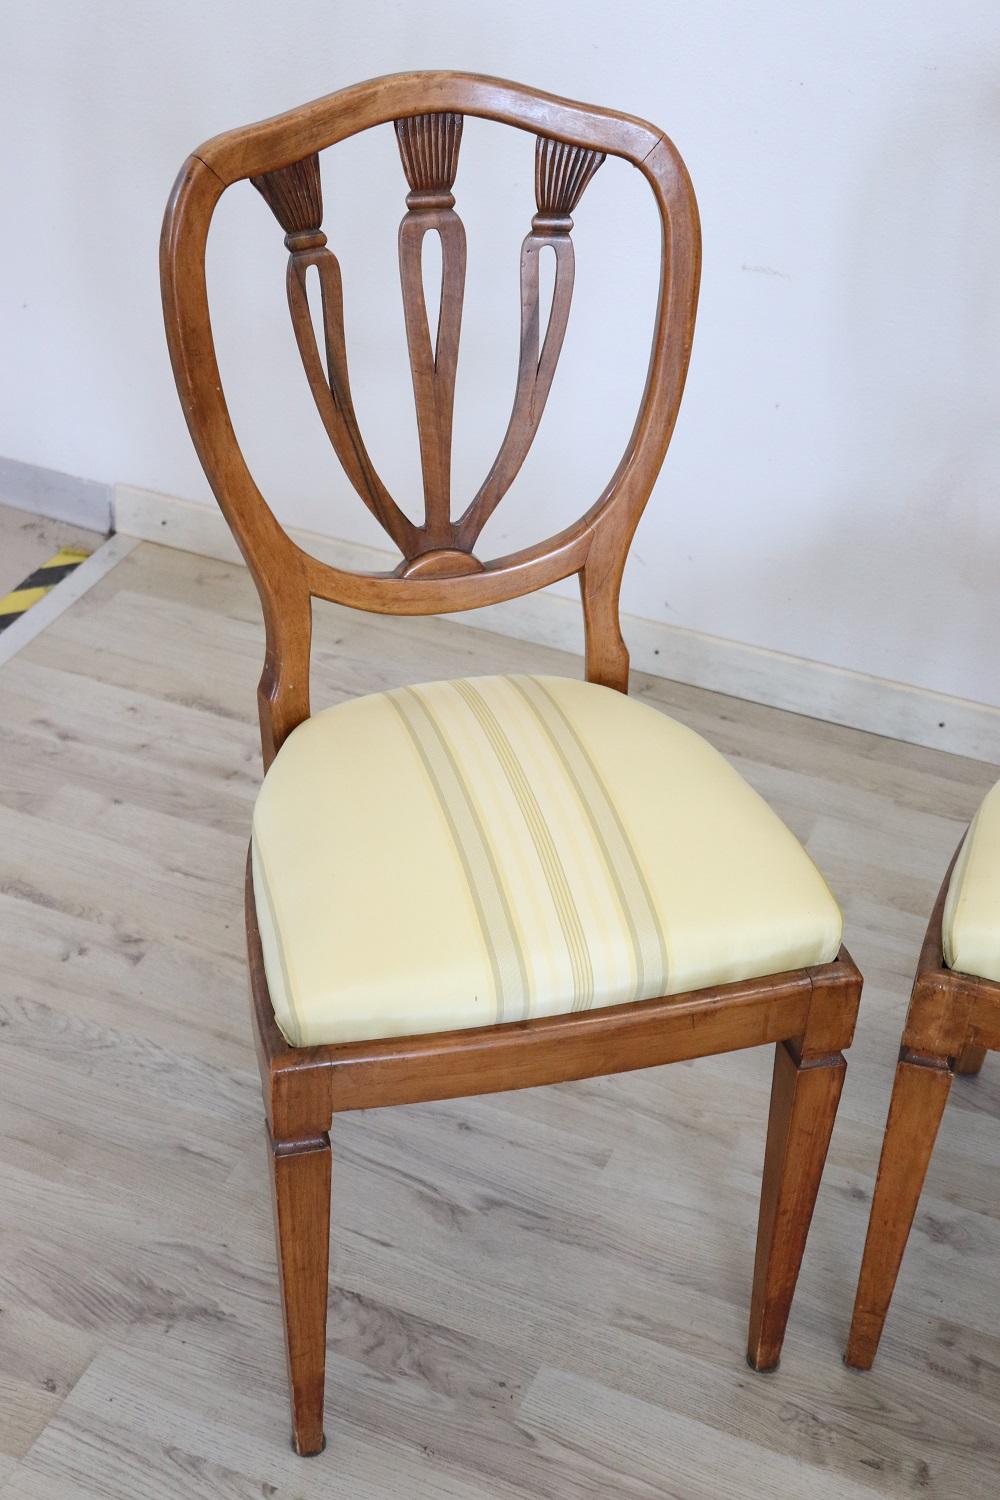 Series of eight refined 19th century authentic Italian walnut wood chairs. Refined decoration the back is carved. The legs are very elegant straight. The seat is wide and comfortable with fine silk lining. The silk lining is used, it has some small